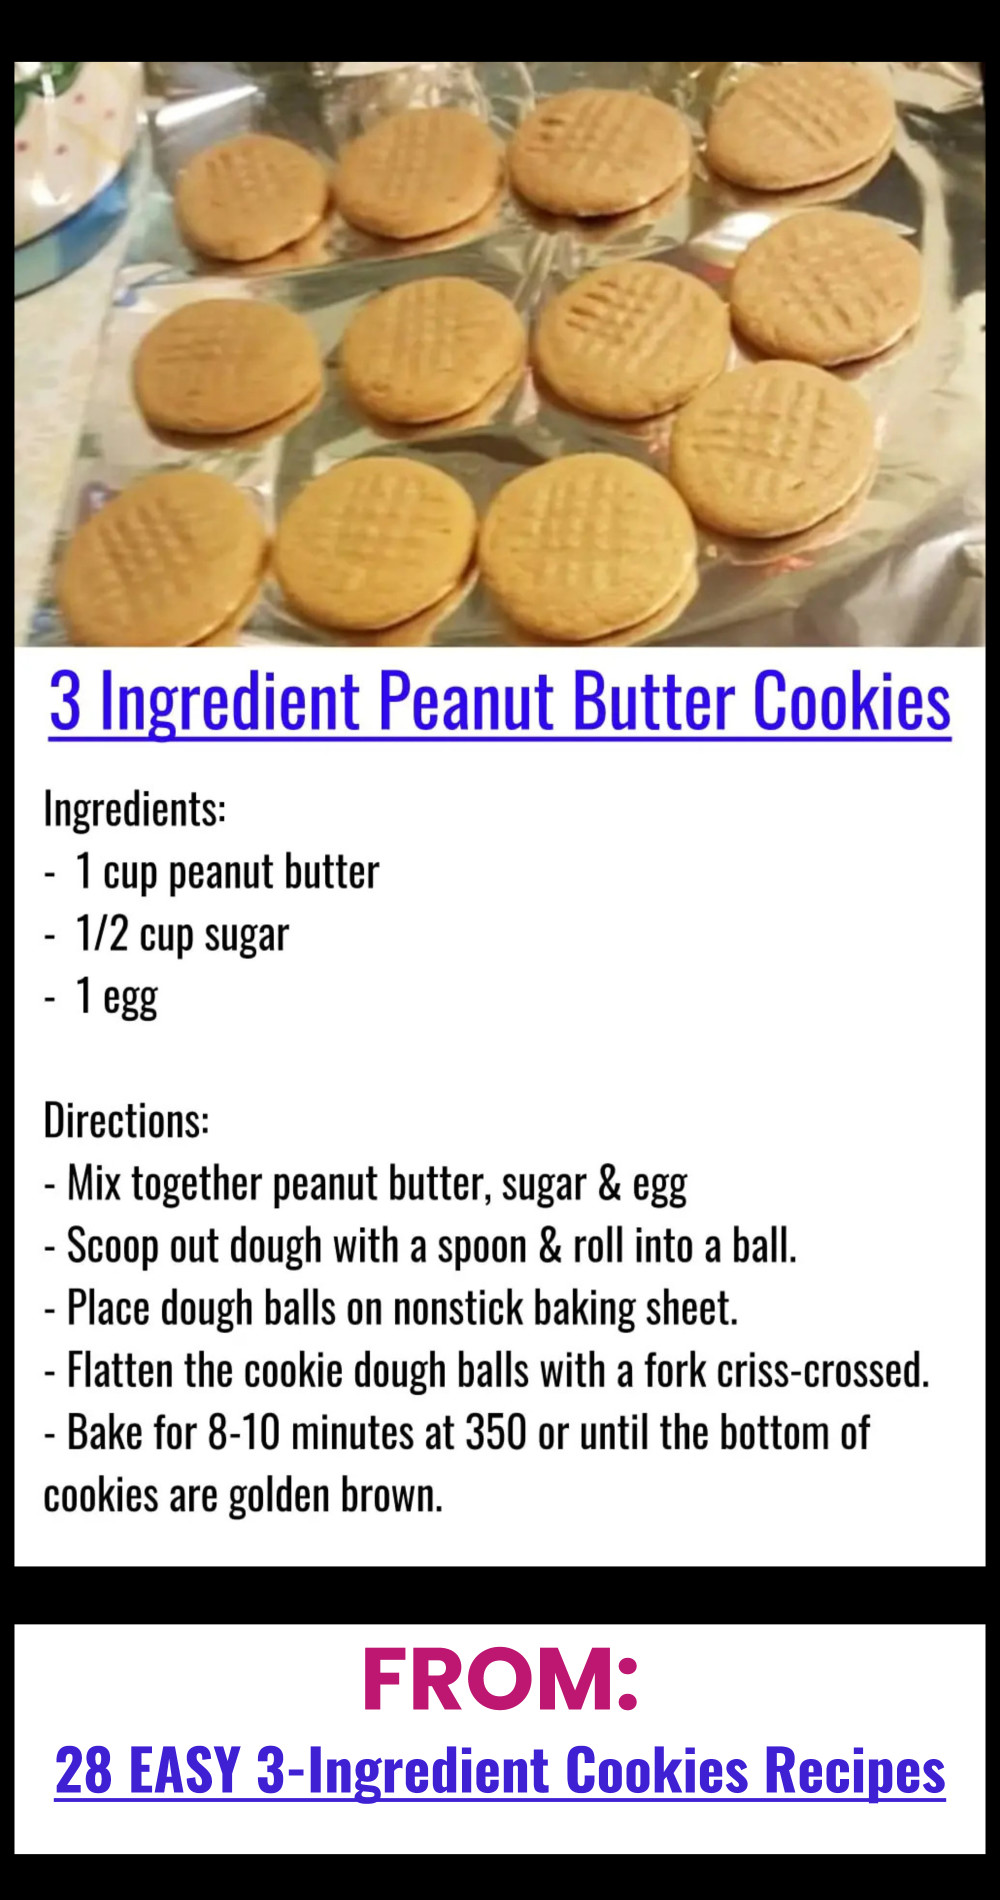 3 ingredient peanut butter cookies from 28 EASY 3-ingredient cookie recipes - NO BAKE cookie recipe variations too